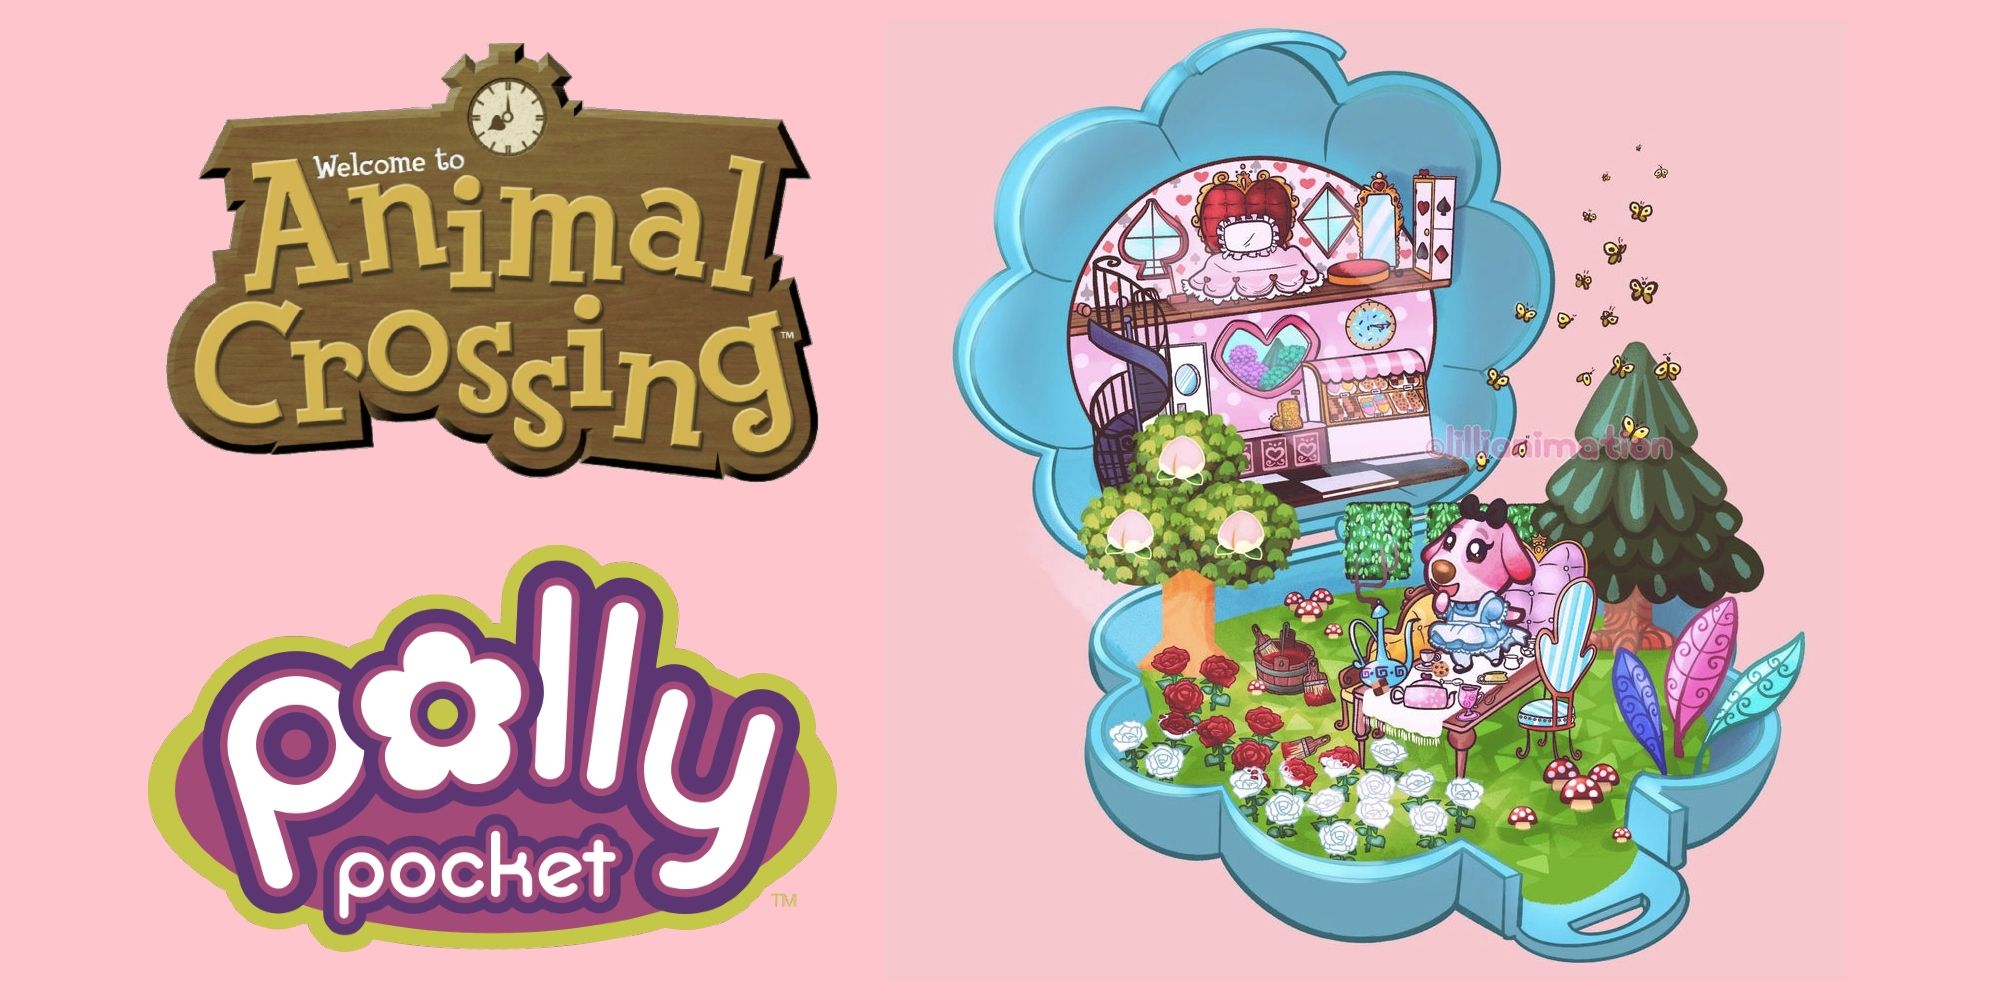 Animal Crossing Player's Polly Pocket Style Character Art Is